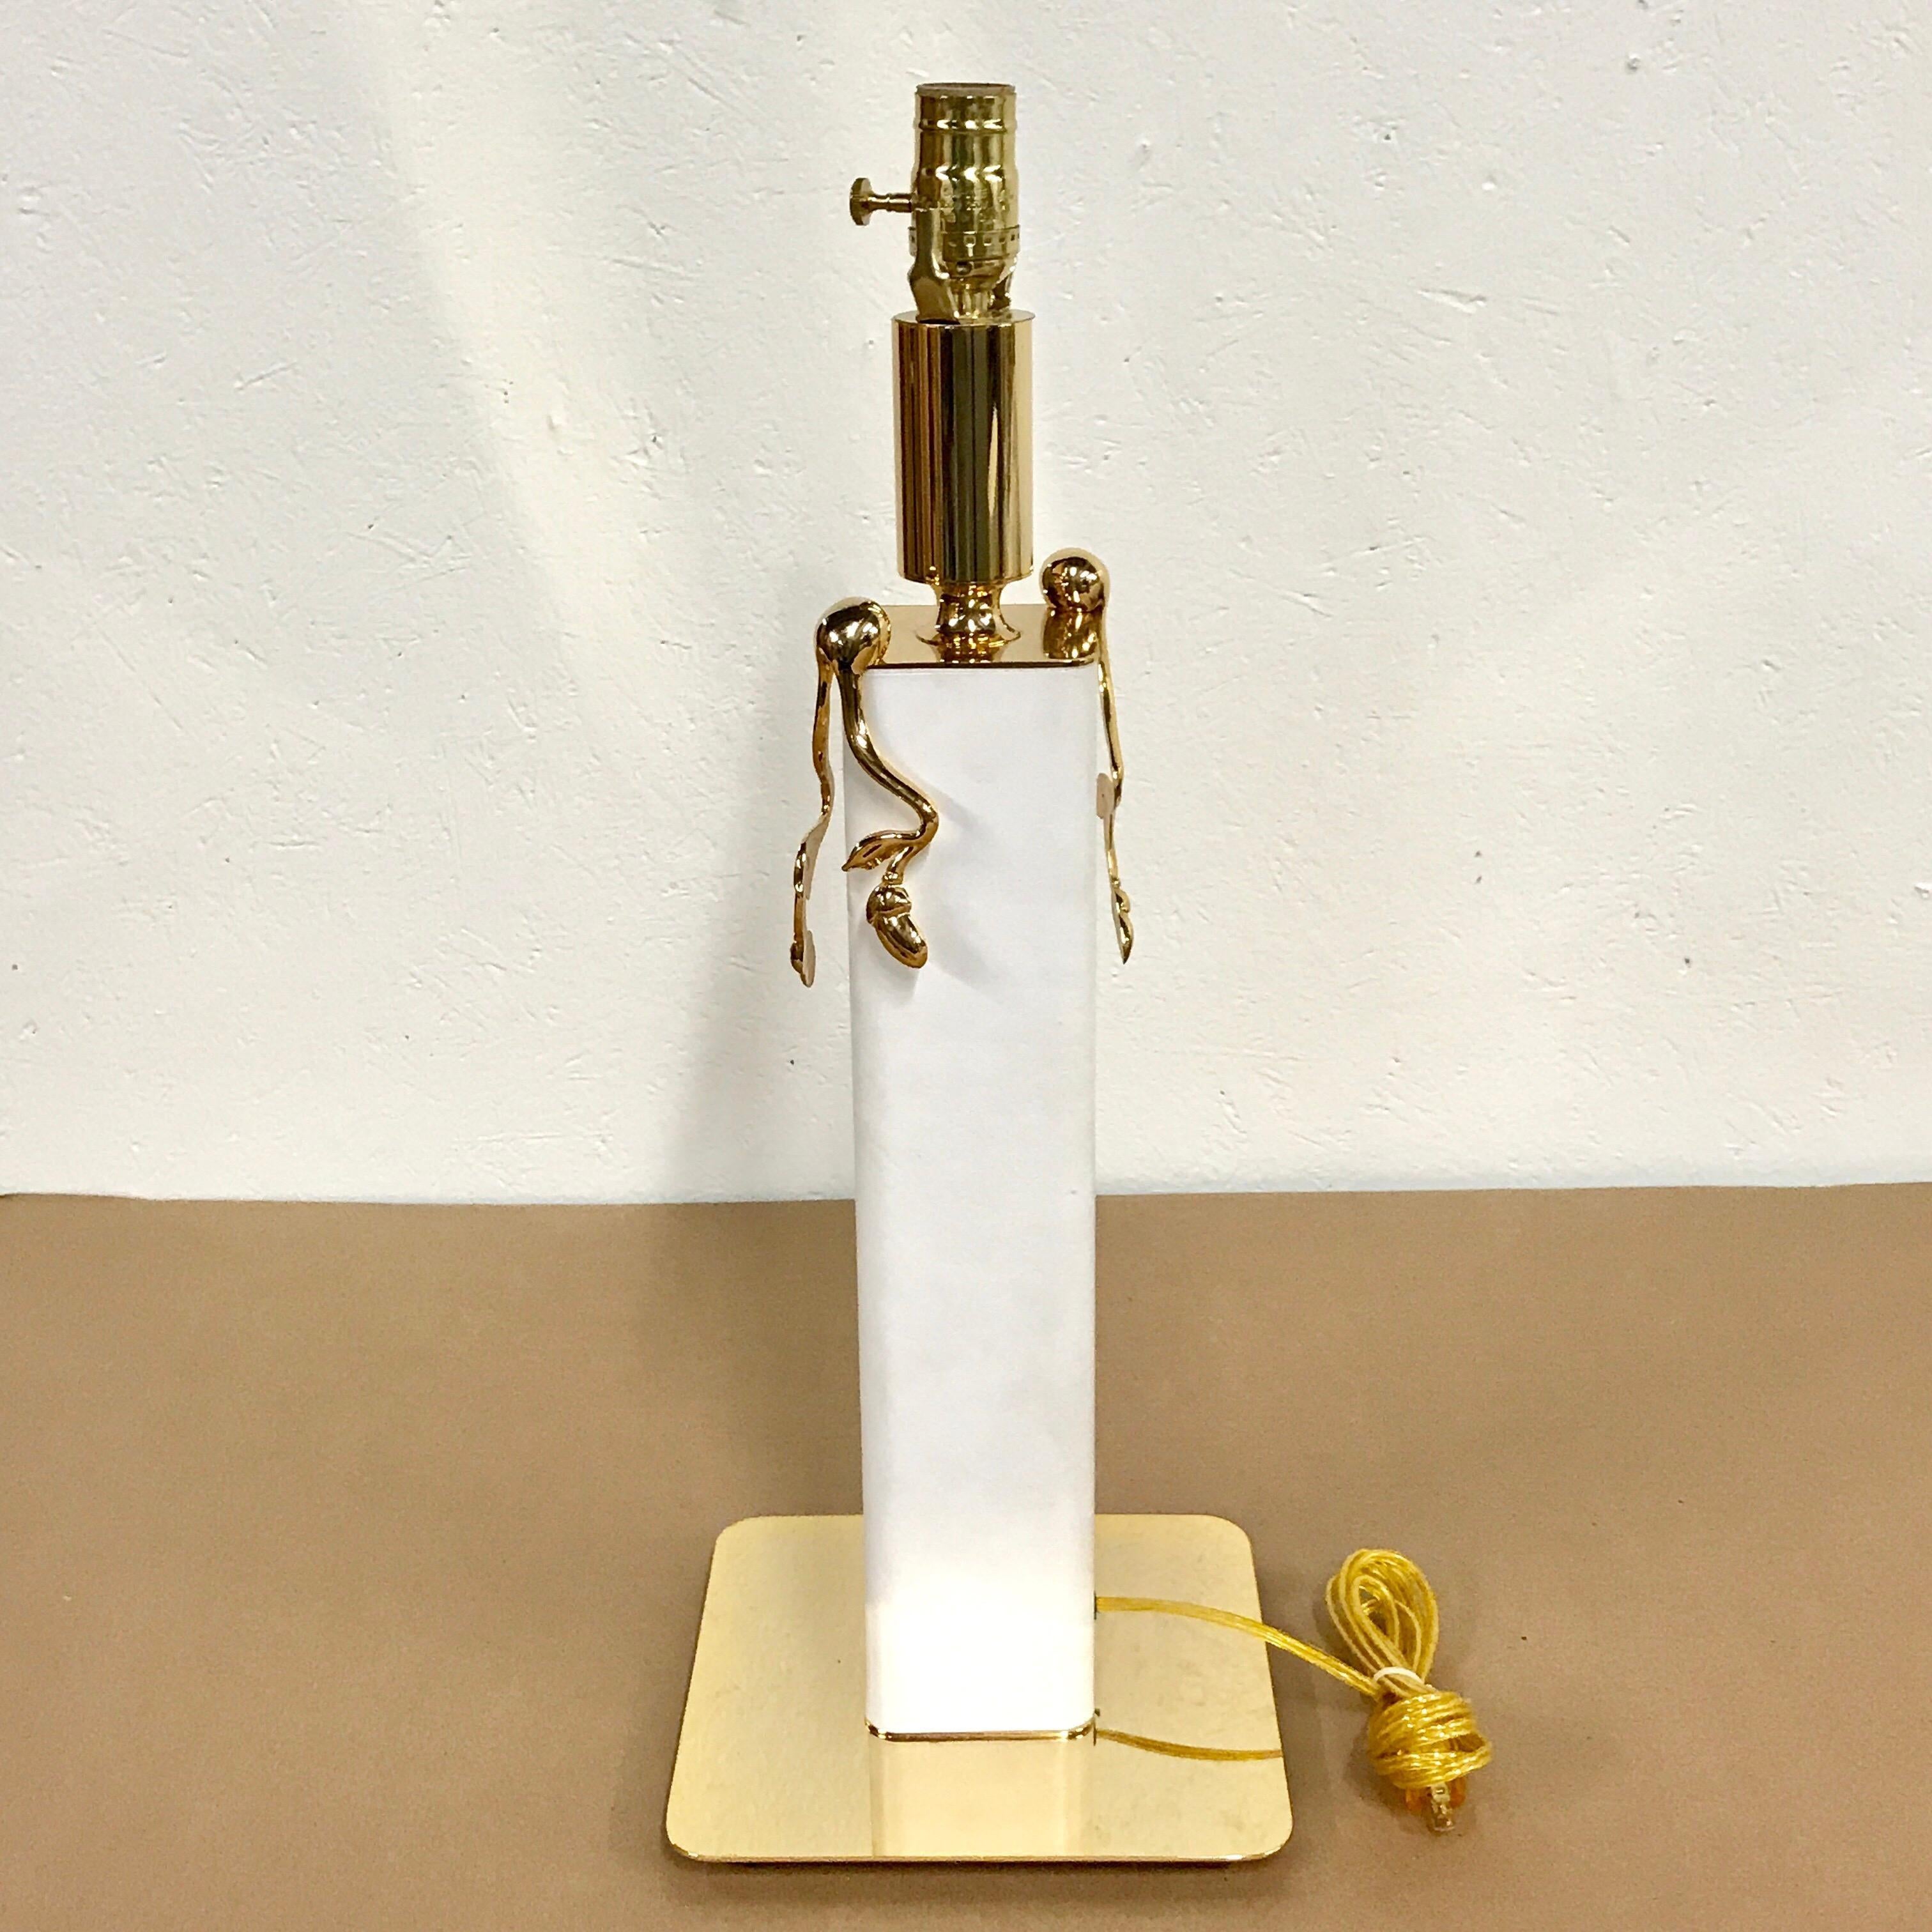 Stitched white leather and gilt brass lamp, with 4